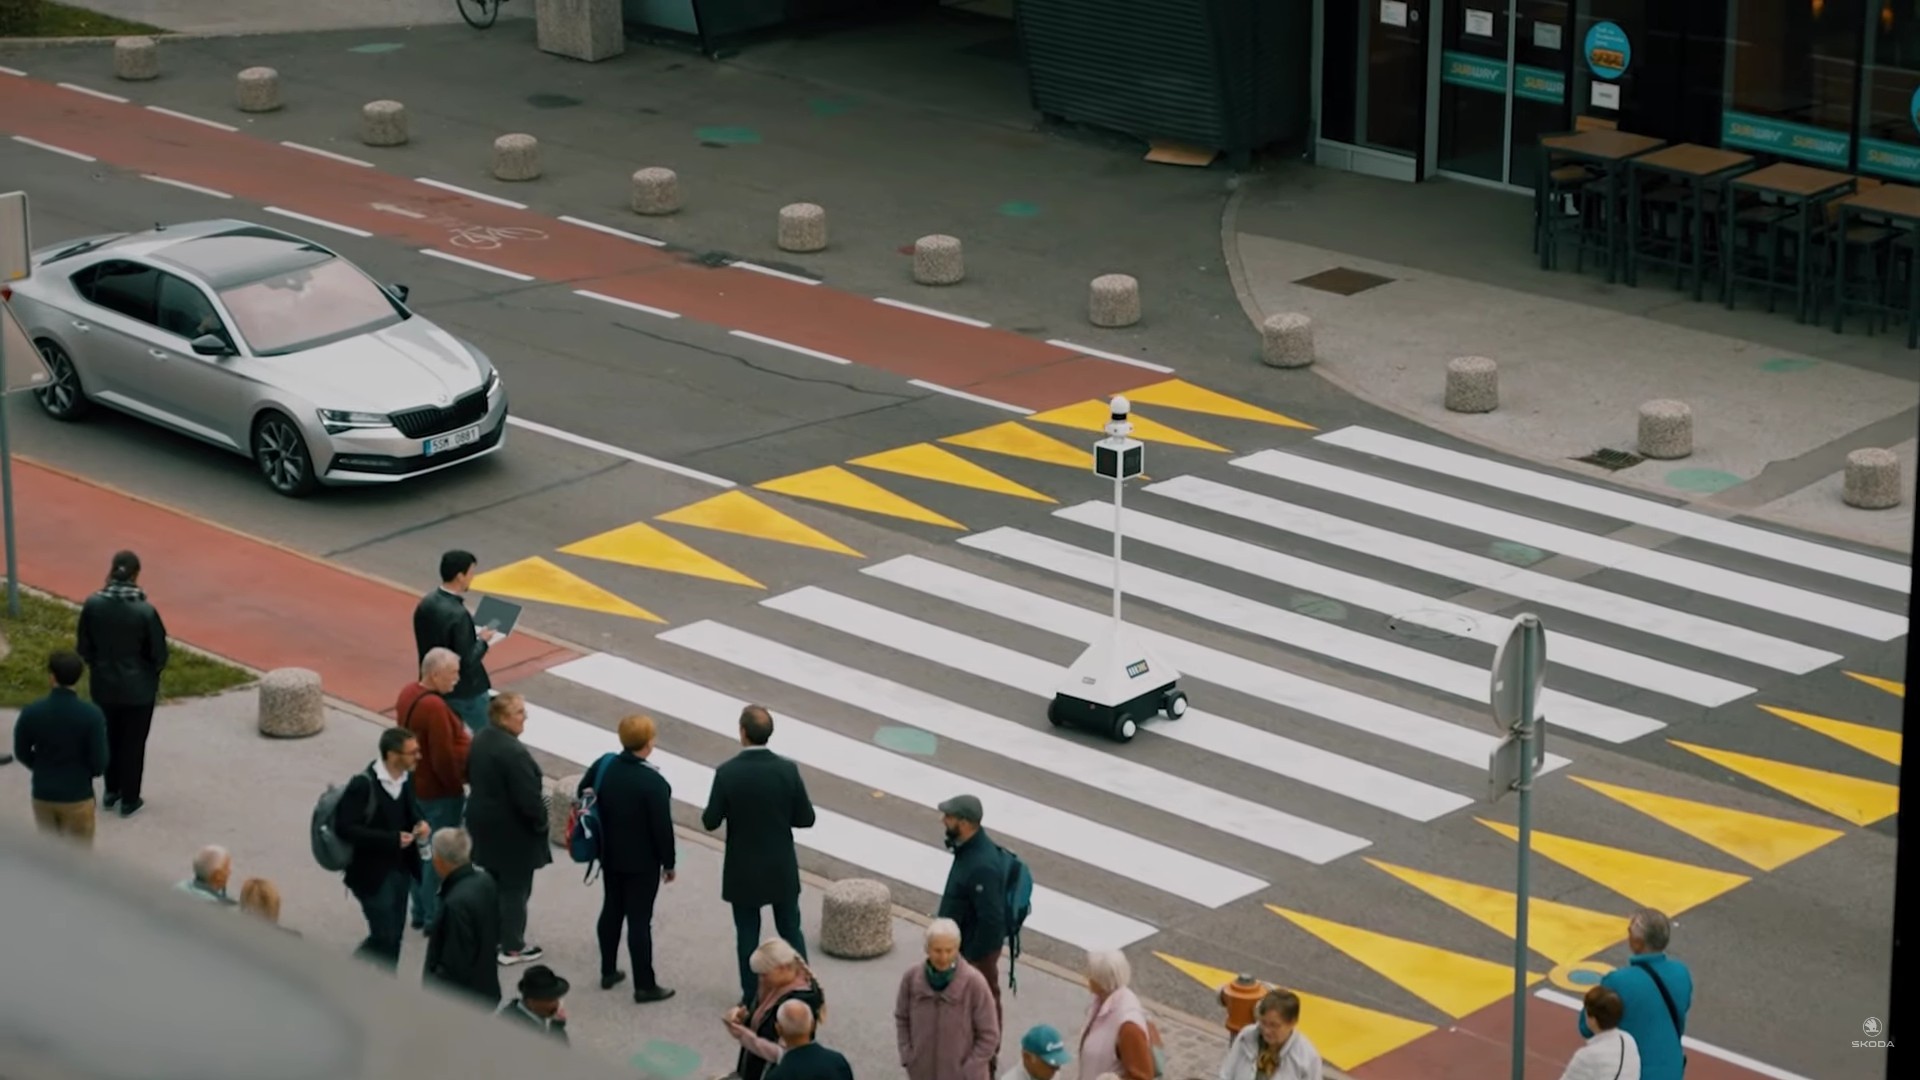 Skoda Tests Grille-Mounted Traffic Lights on Autonomous Cars, How